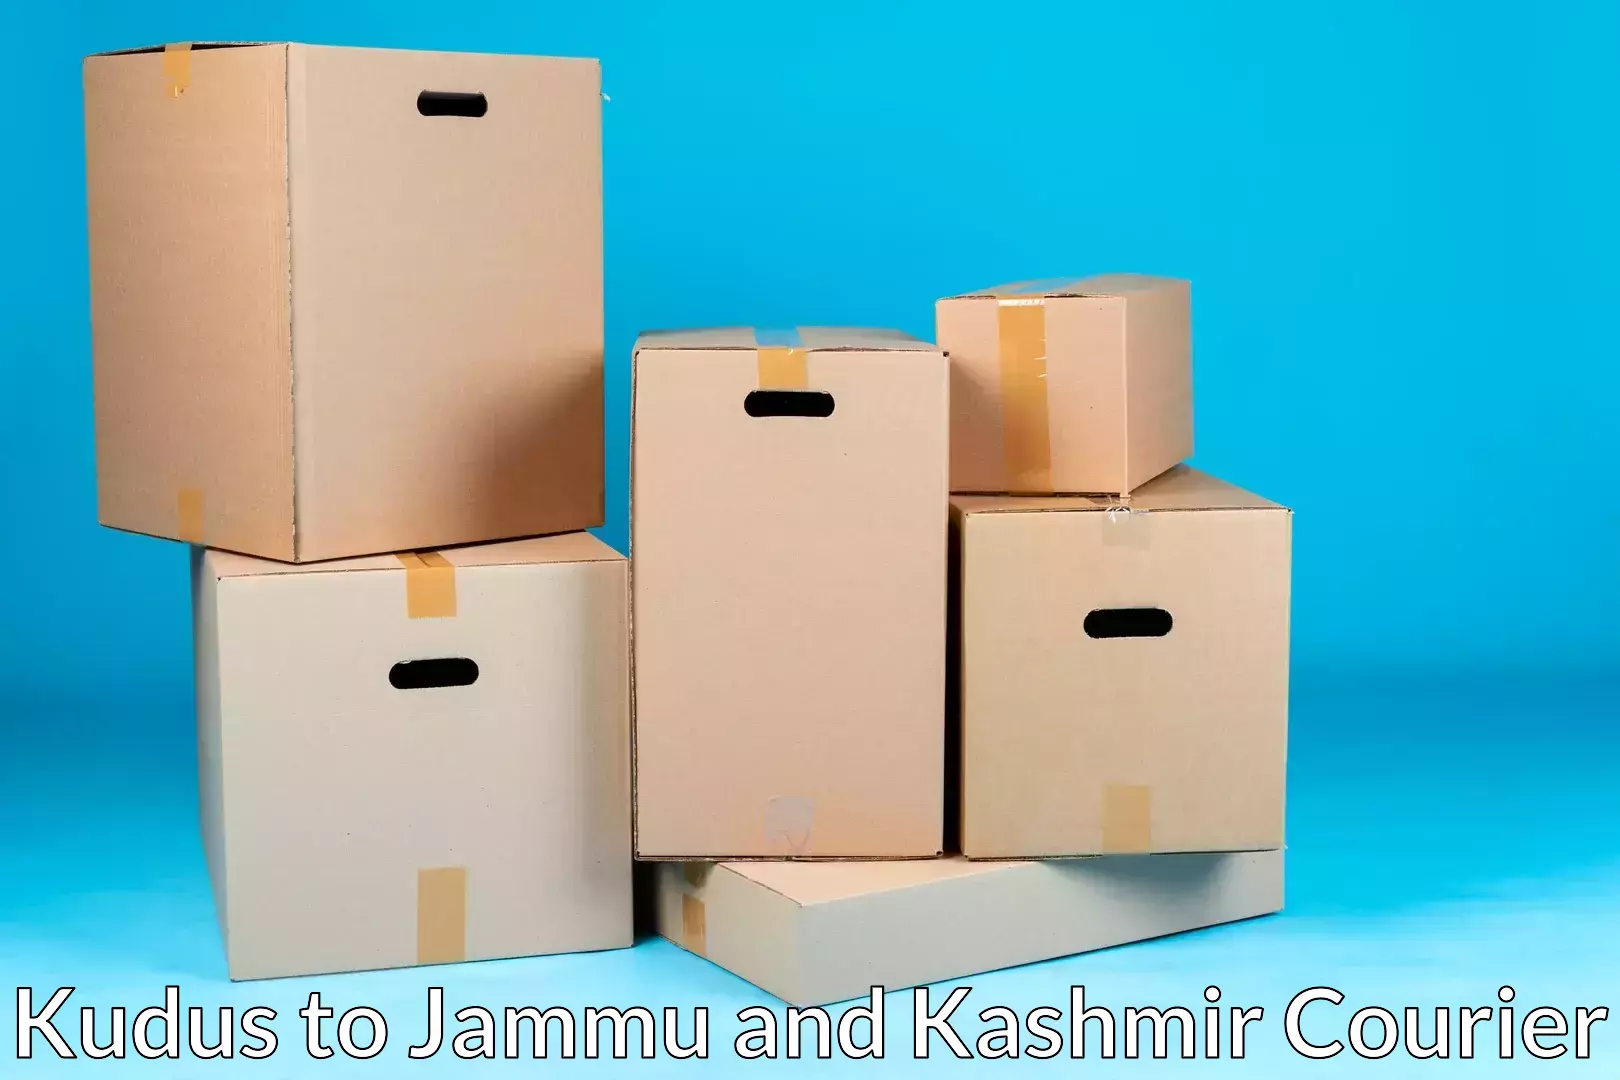 Furniture delivery service Kudus to Jammu and Kashmir